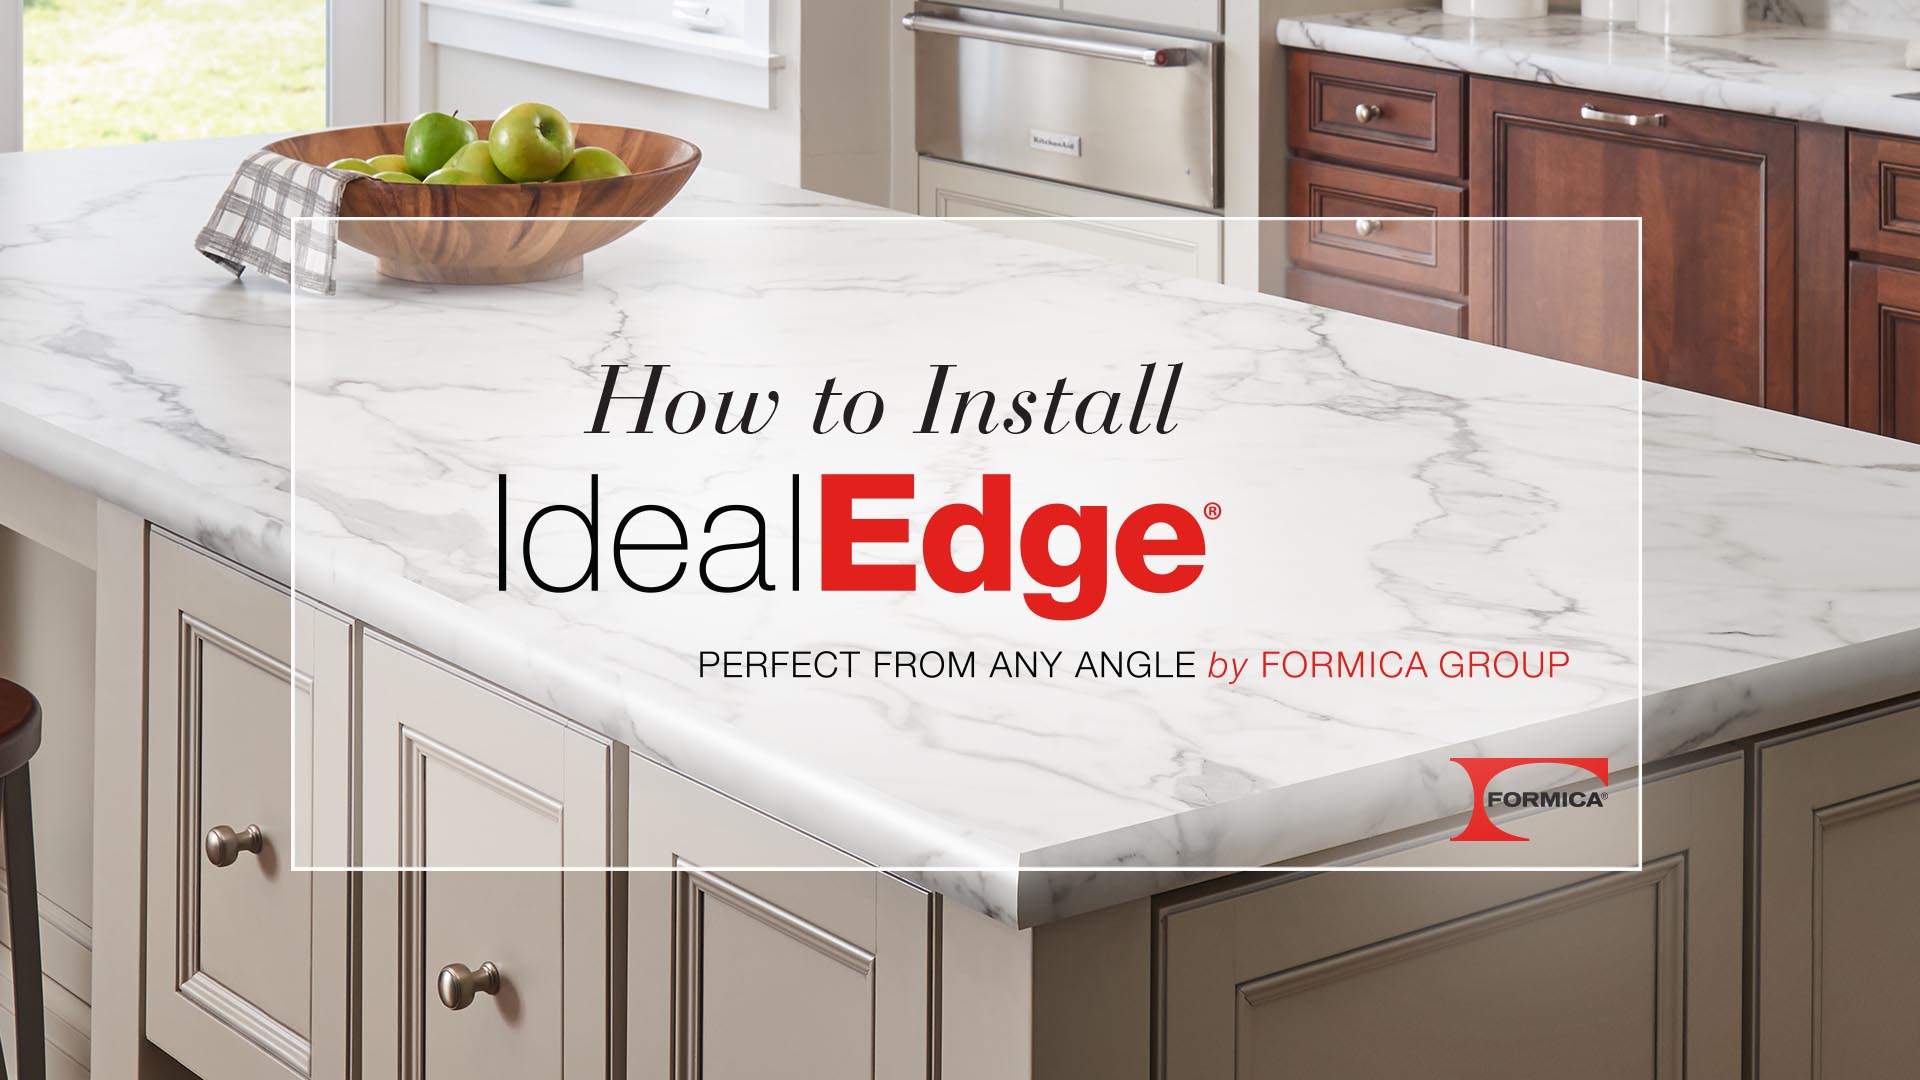 How to Install IdealEdge® Decorative Edging by Formica Group